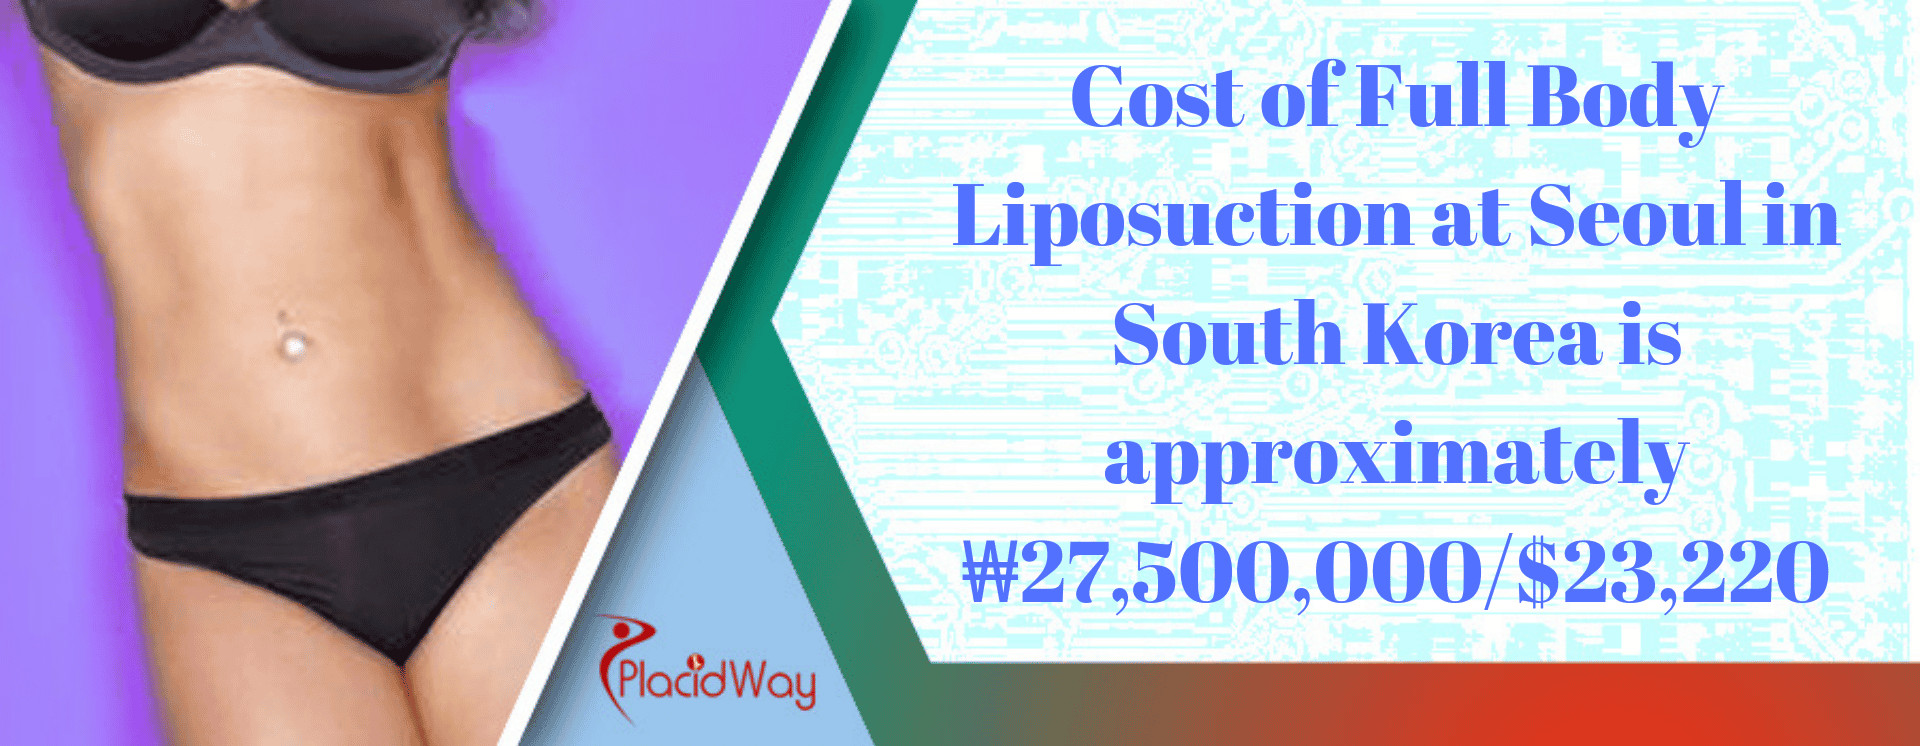 Cost of Full Body Liposuction at Seoul in South Korea is approximately ₩27,500,000_$23,220